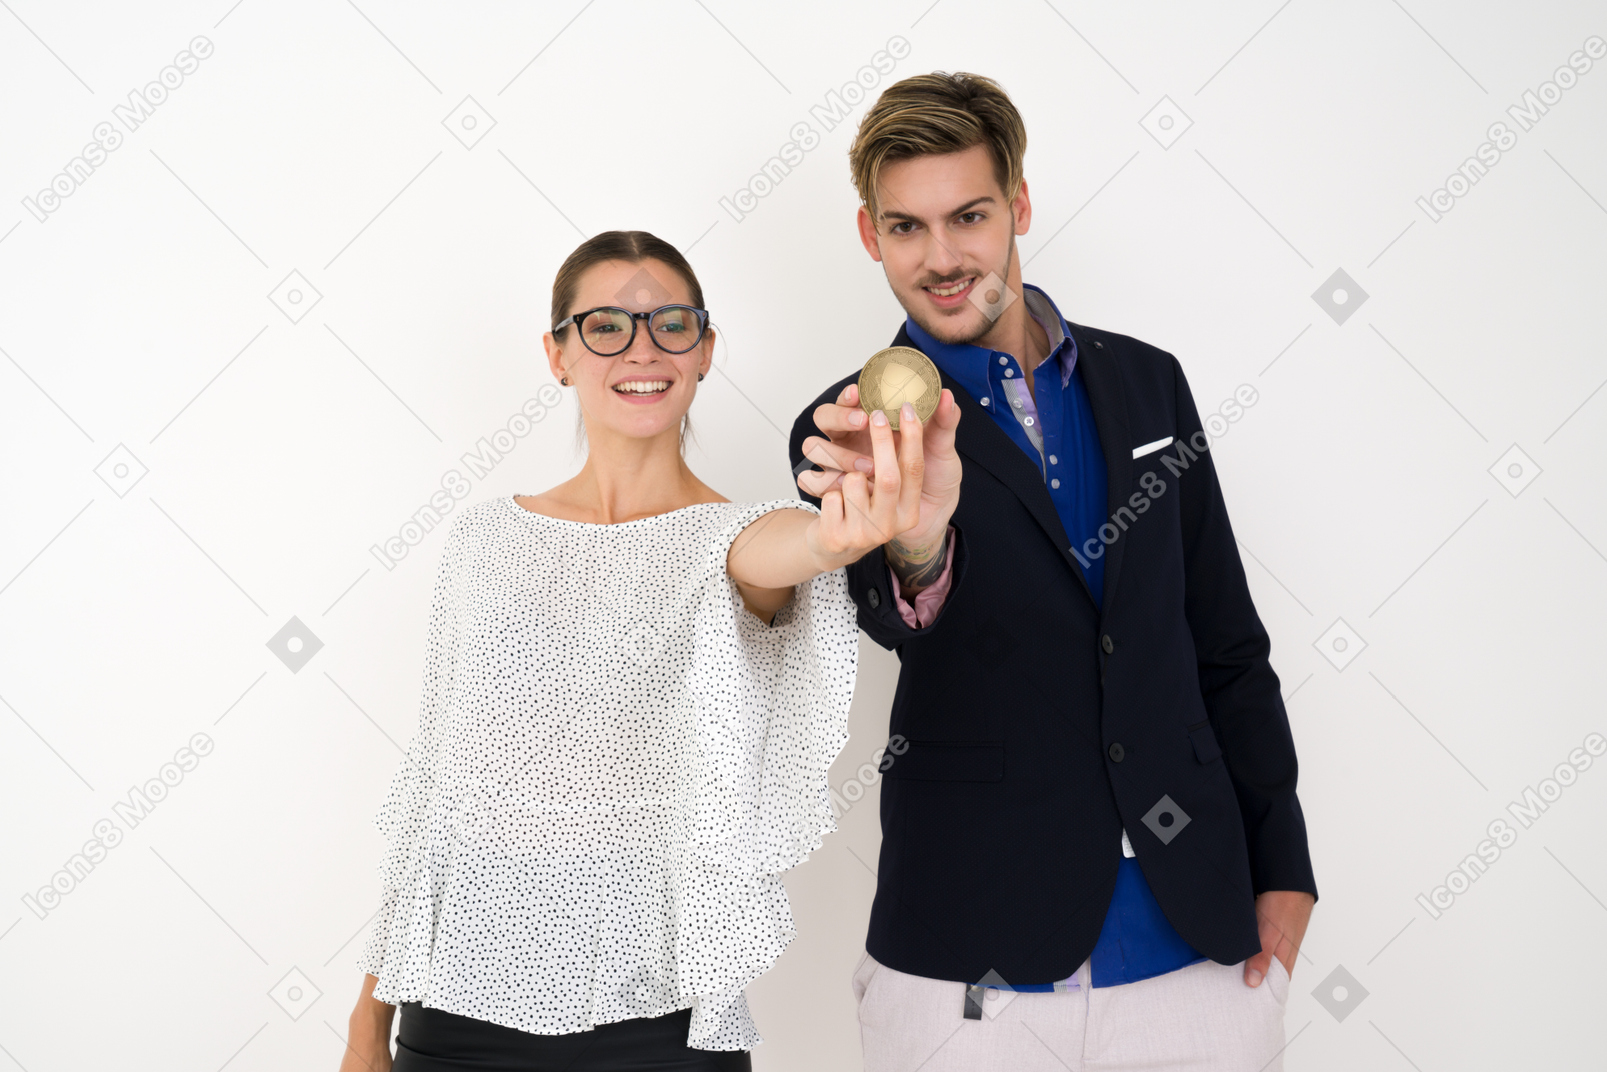 Attractive young man and woman holding a nem coin